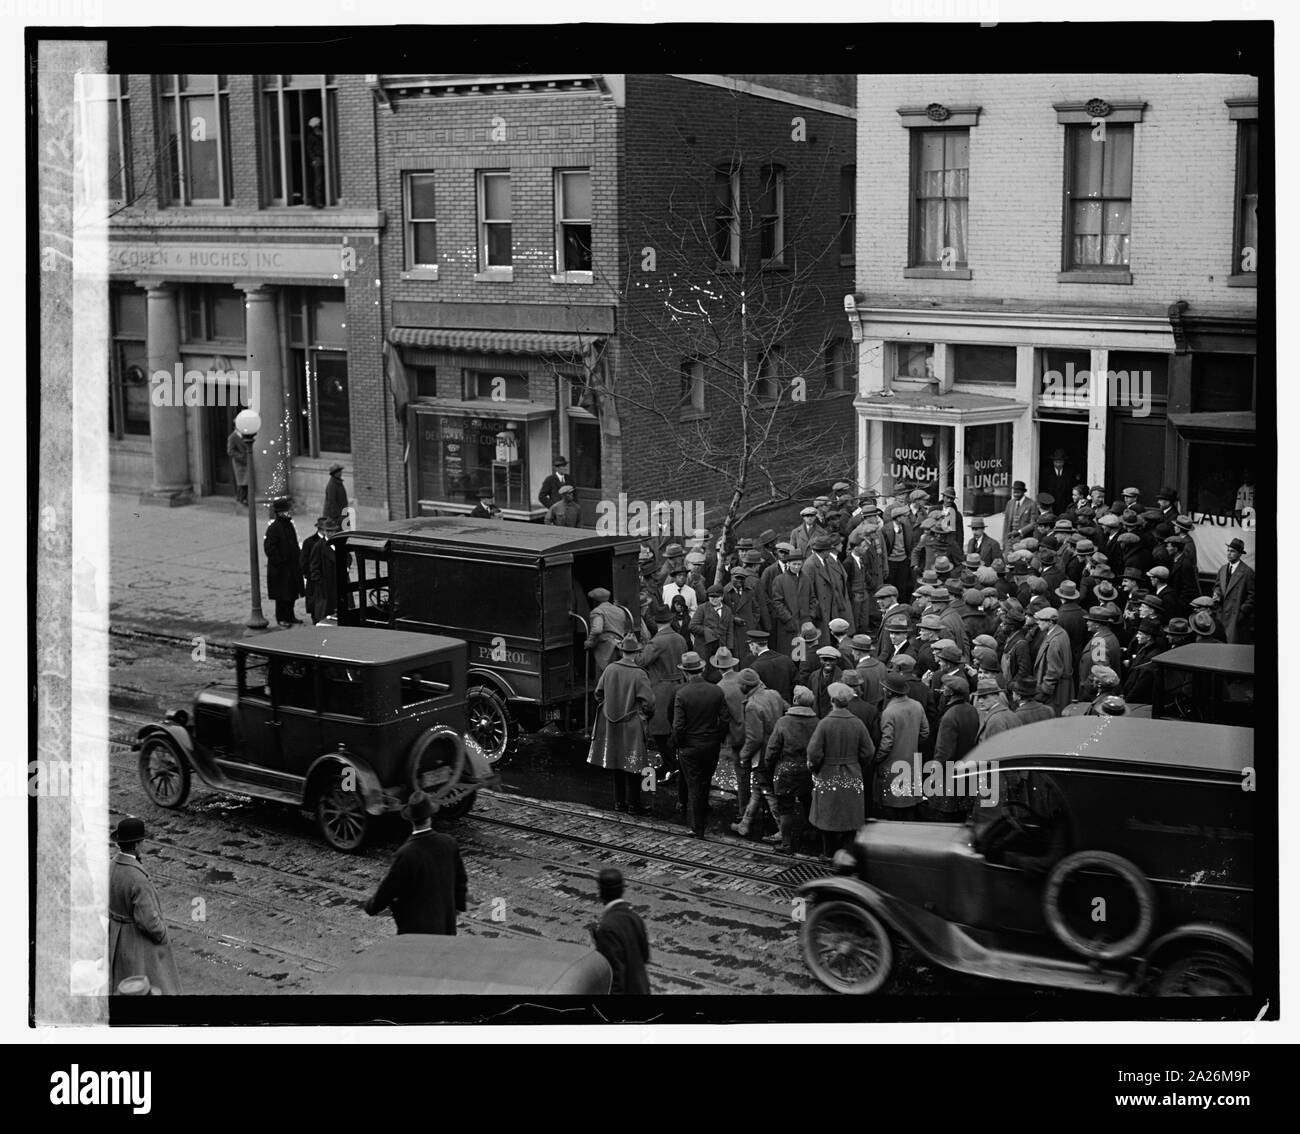 Police raid on gamblers den. E. St. bet. 12 and 13th, 1/31/25 Stock Photo